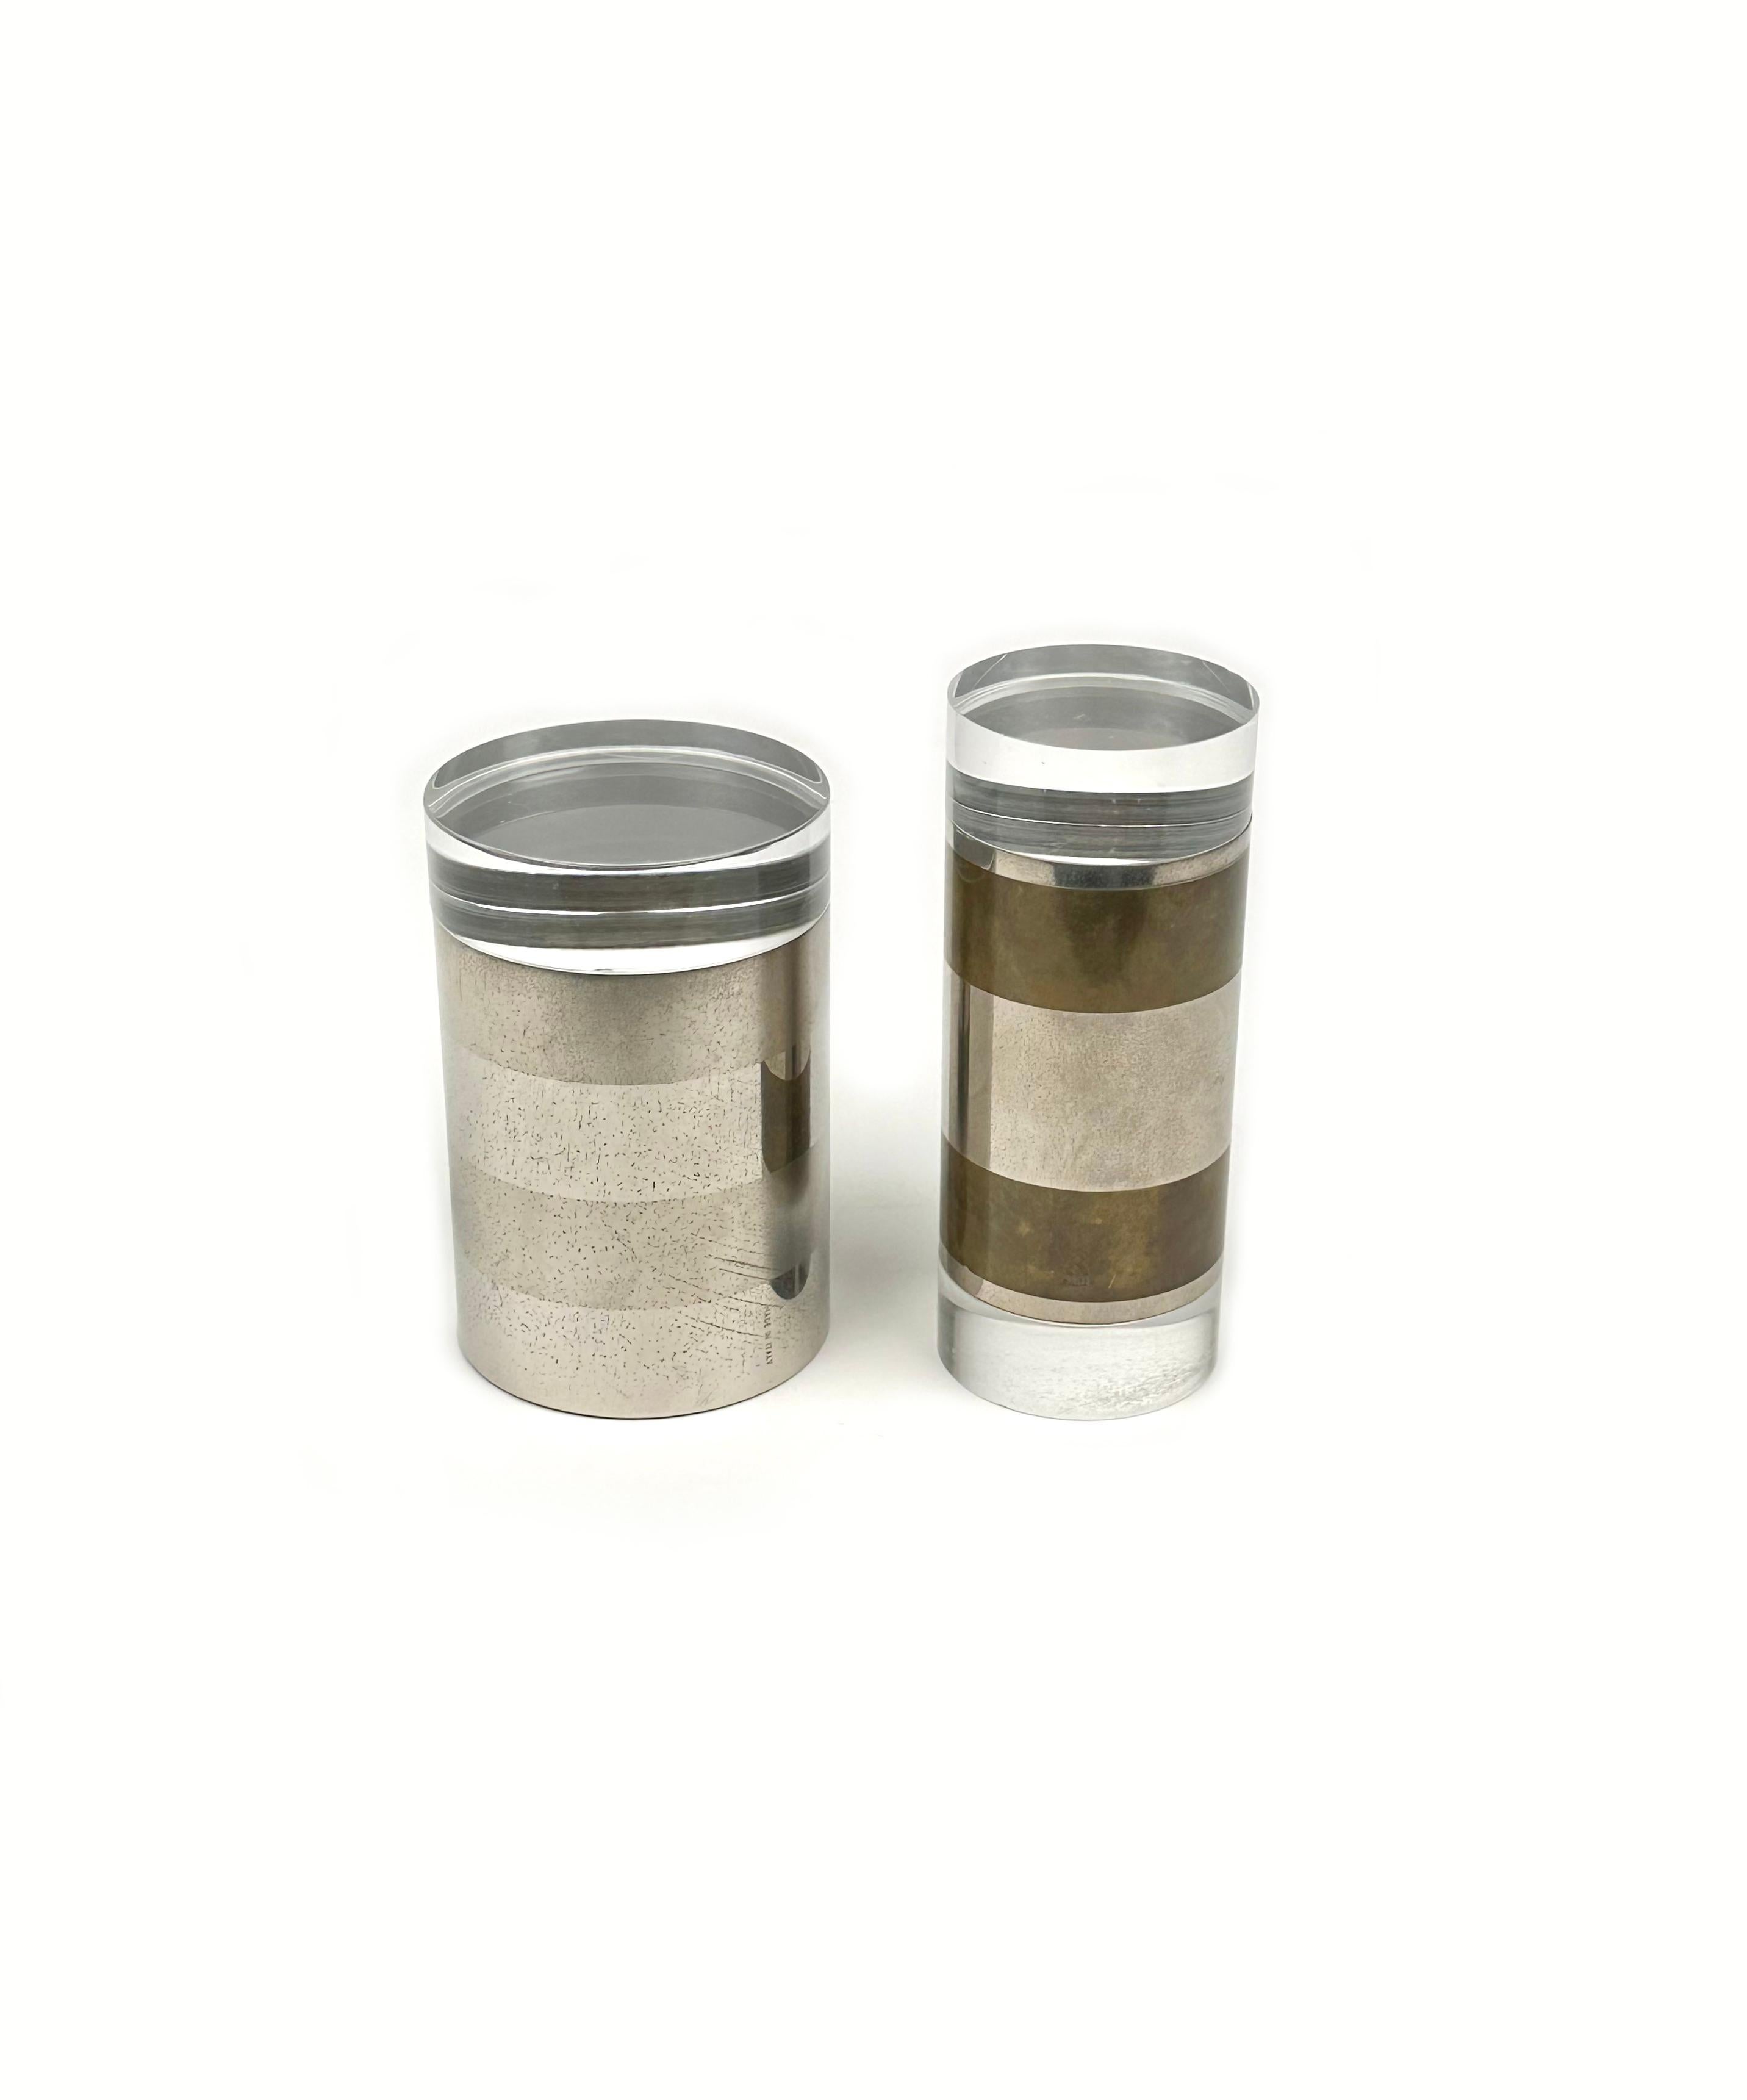 Amazing pair of cylindrical box in chrome, brass and lucite by the Italian designer Romeo Rega.

Made in Italy in the 1970s.

His signature is engraved on the pair of box as shown in photos.

Beautiful desks accessory or pieces for a coffee table or